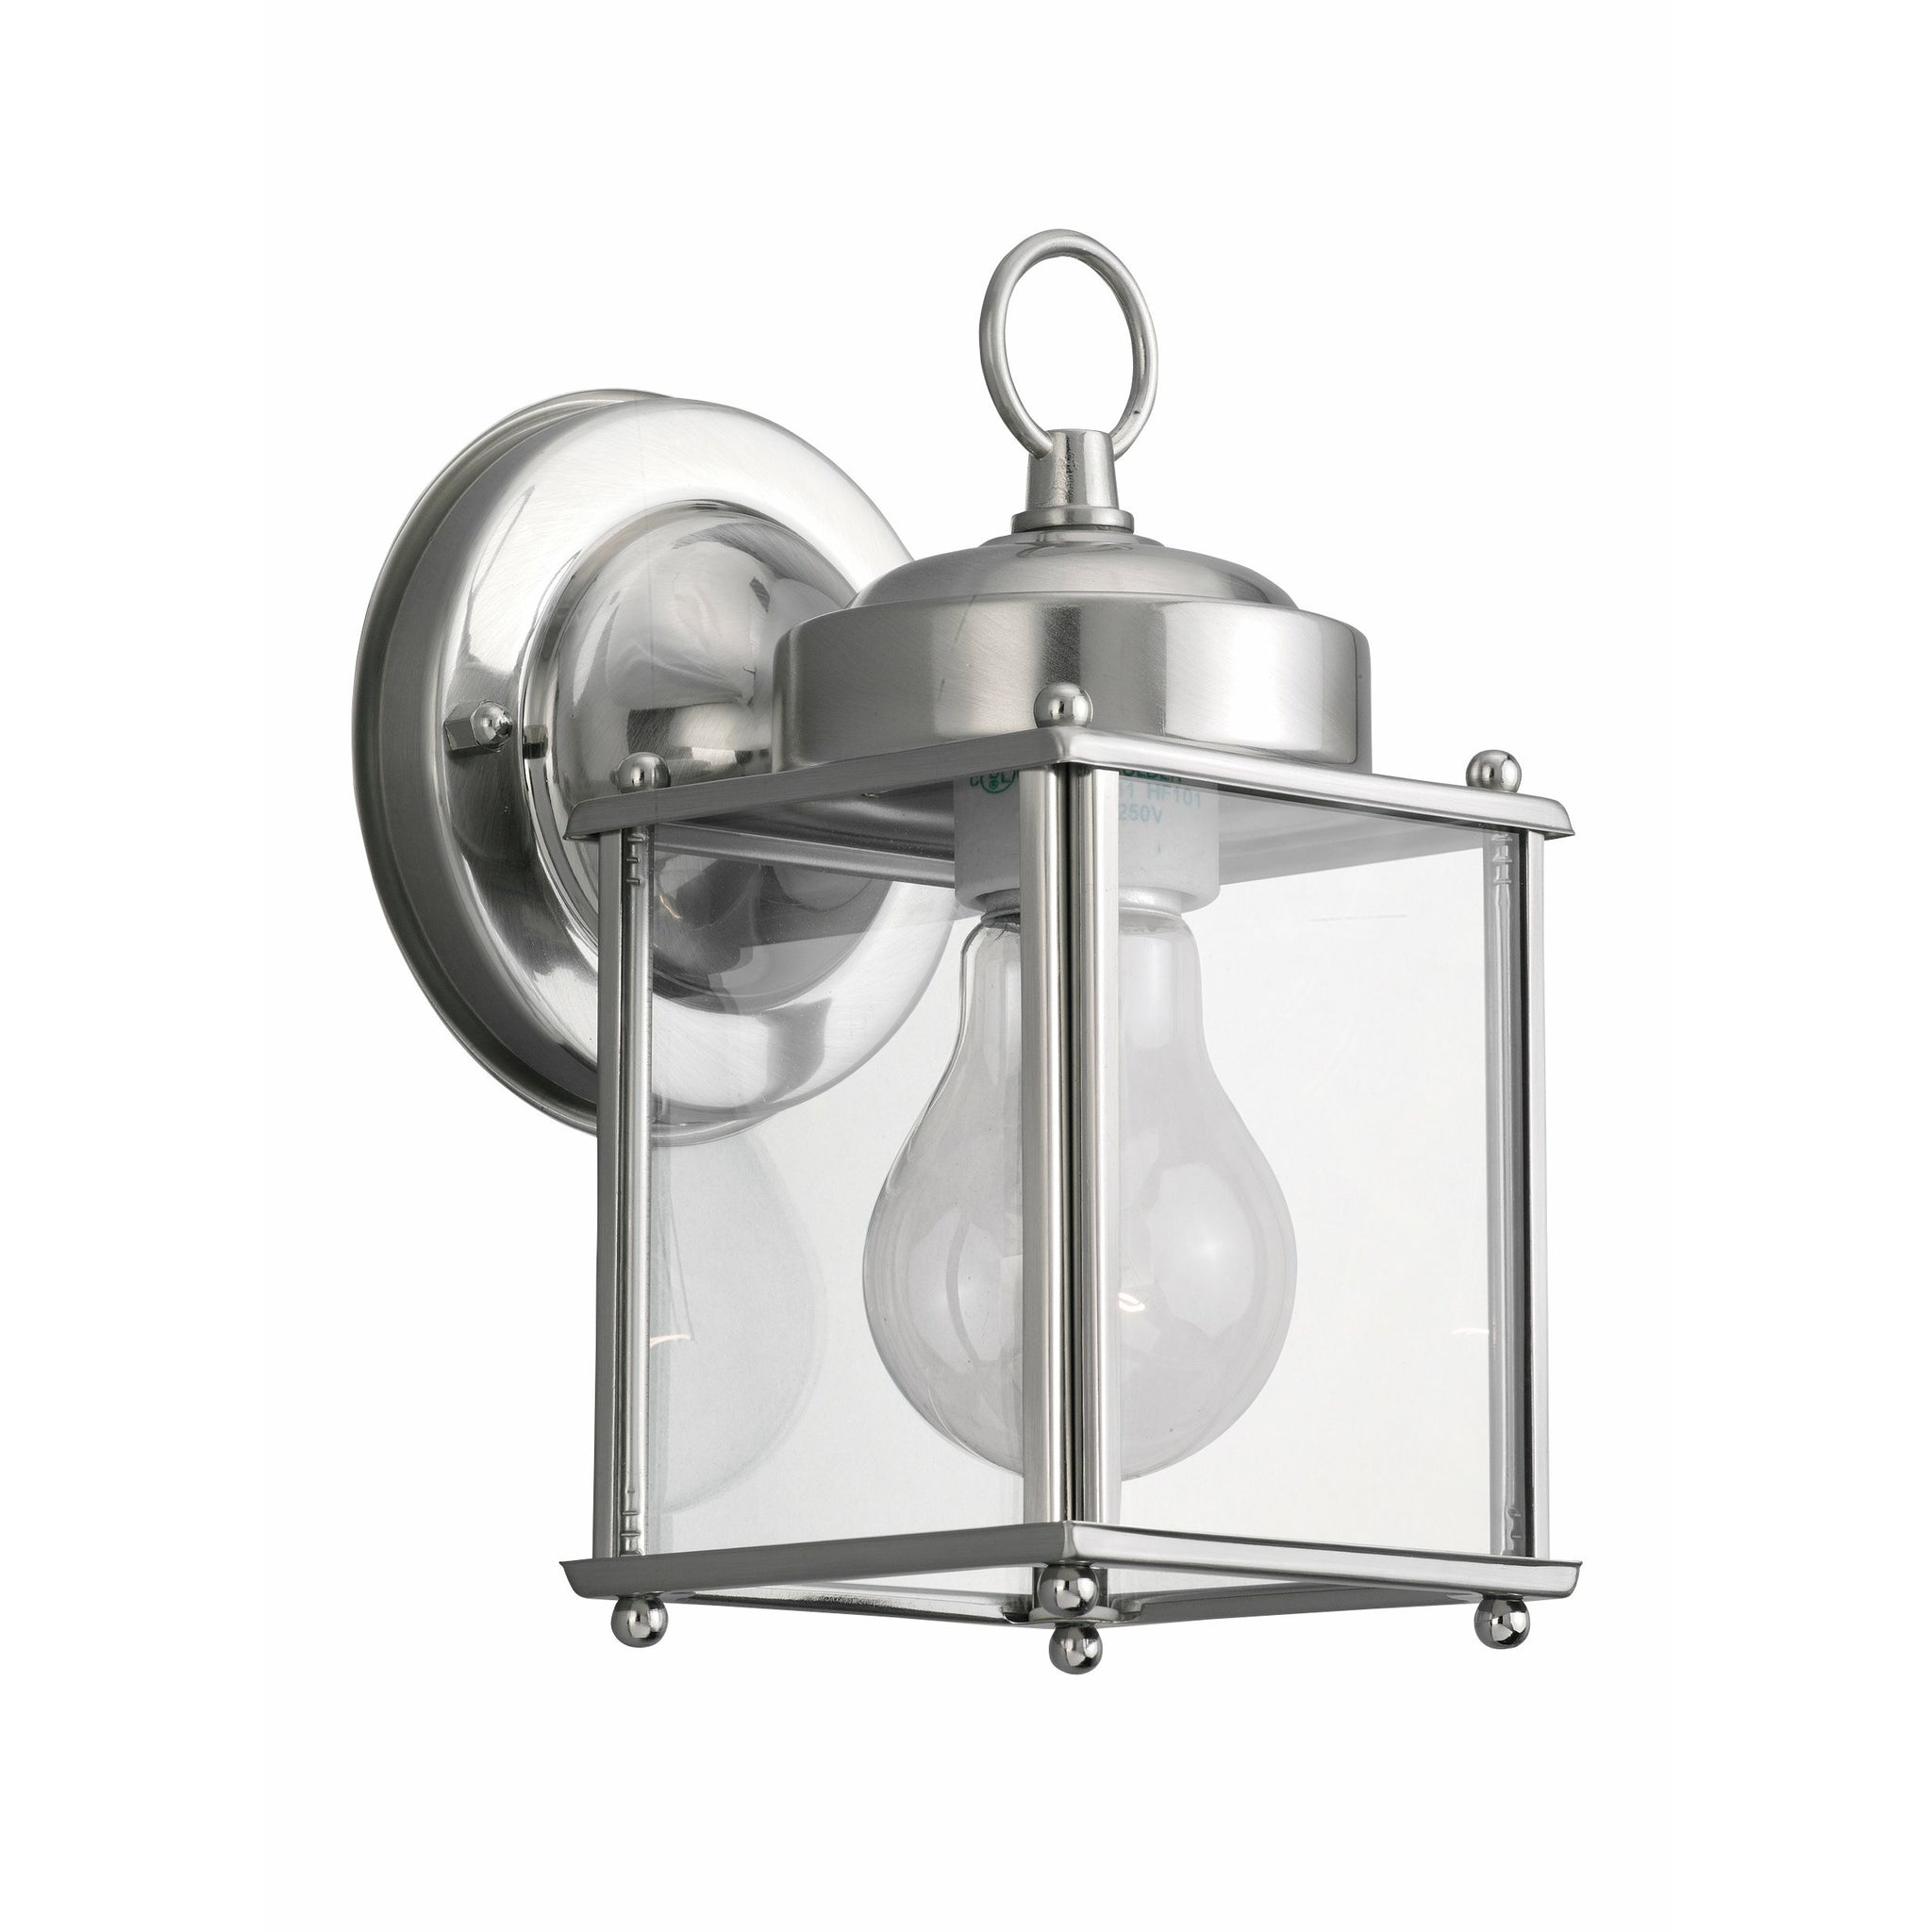 New Castle Outdoor Wall Light Antique Brushed Nickel